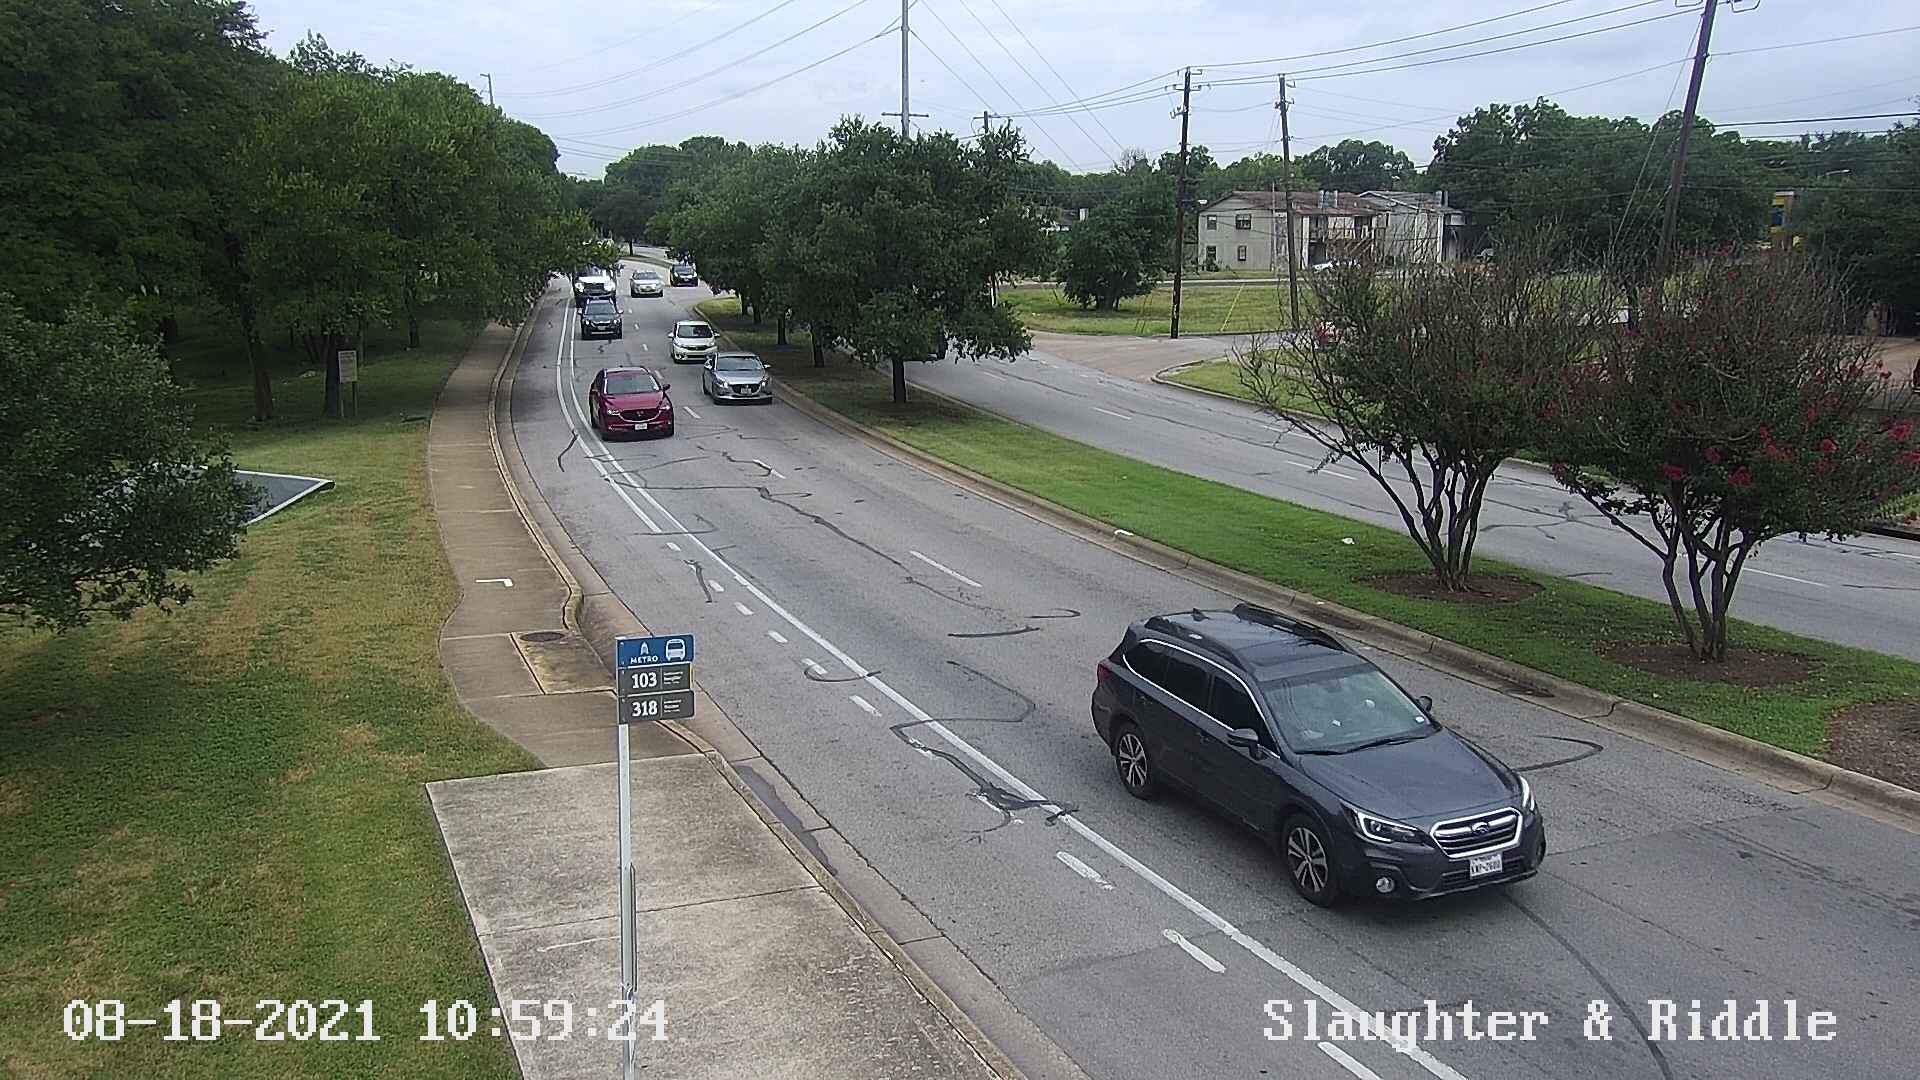  SLAUGHTER LN / RIDDLE RD Traffic Camera